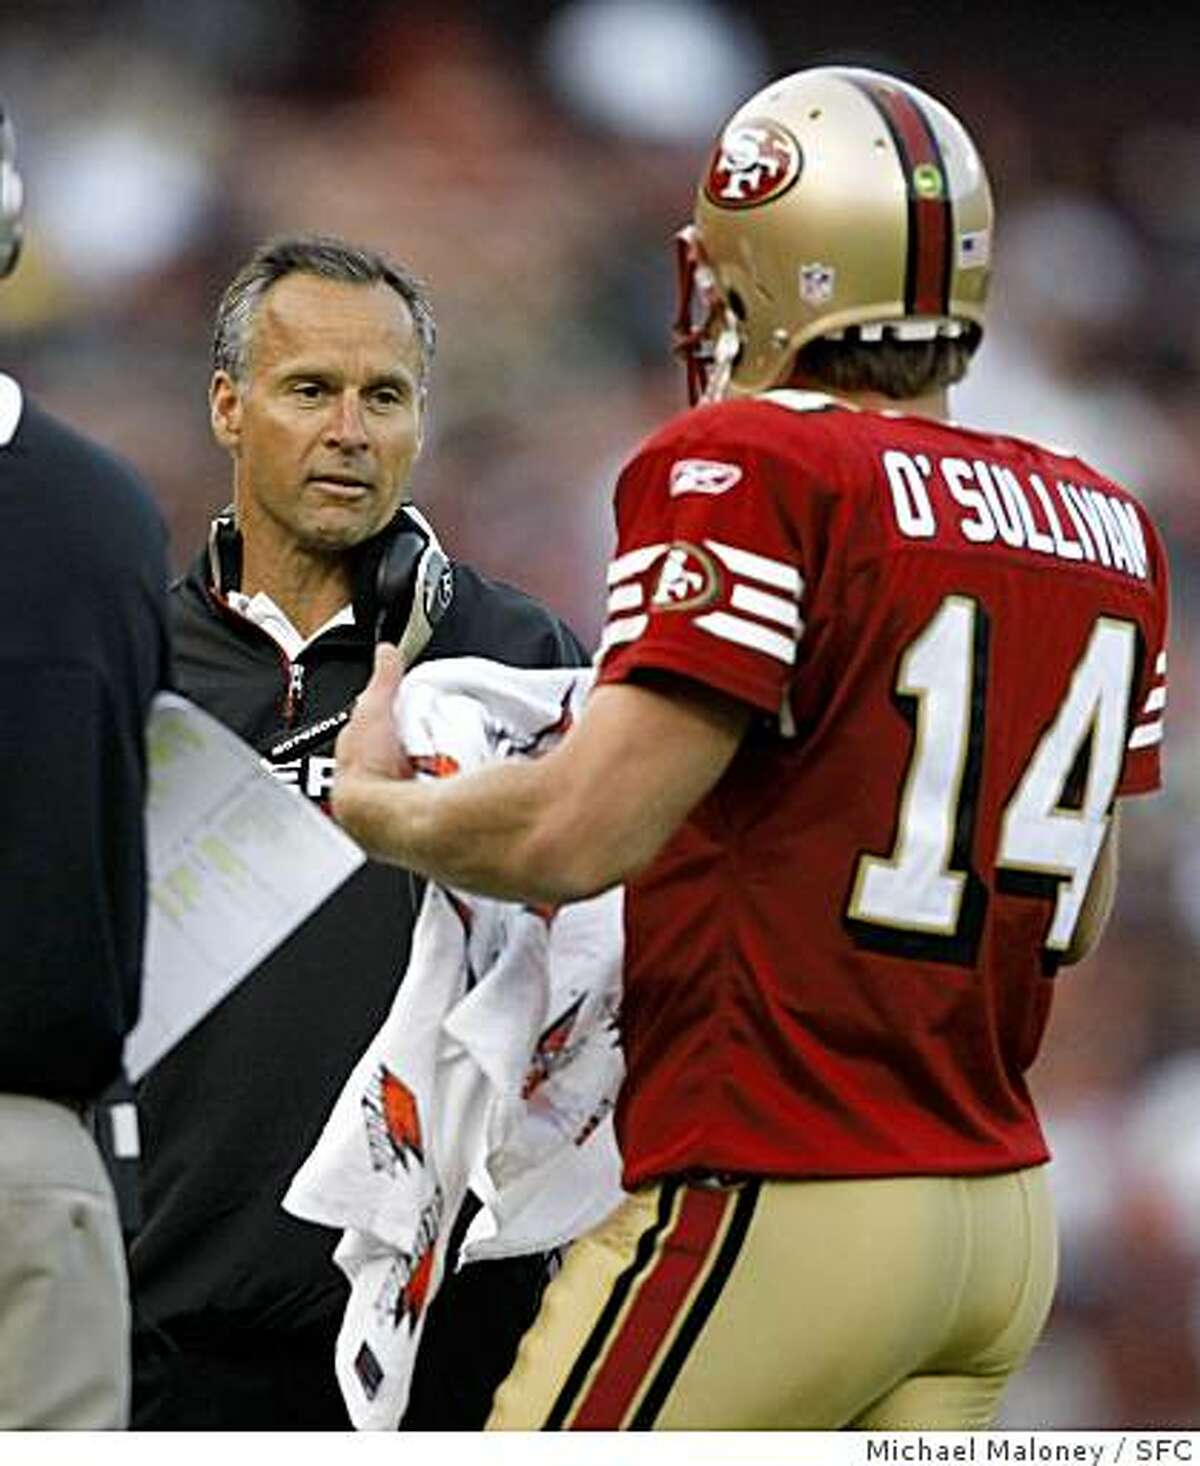 San Francisco 49ers head coach Mike Nolan talks to quarterback J.T. O'Sullivan during a 2nd quarter time out.The San Francisco 49ers host the Green Bay Packers in an NFL preseason game at Candlestick Park in San Francisco, Calif., on August 16, 2008.